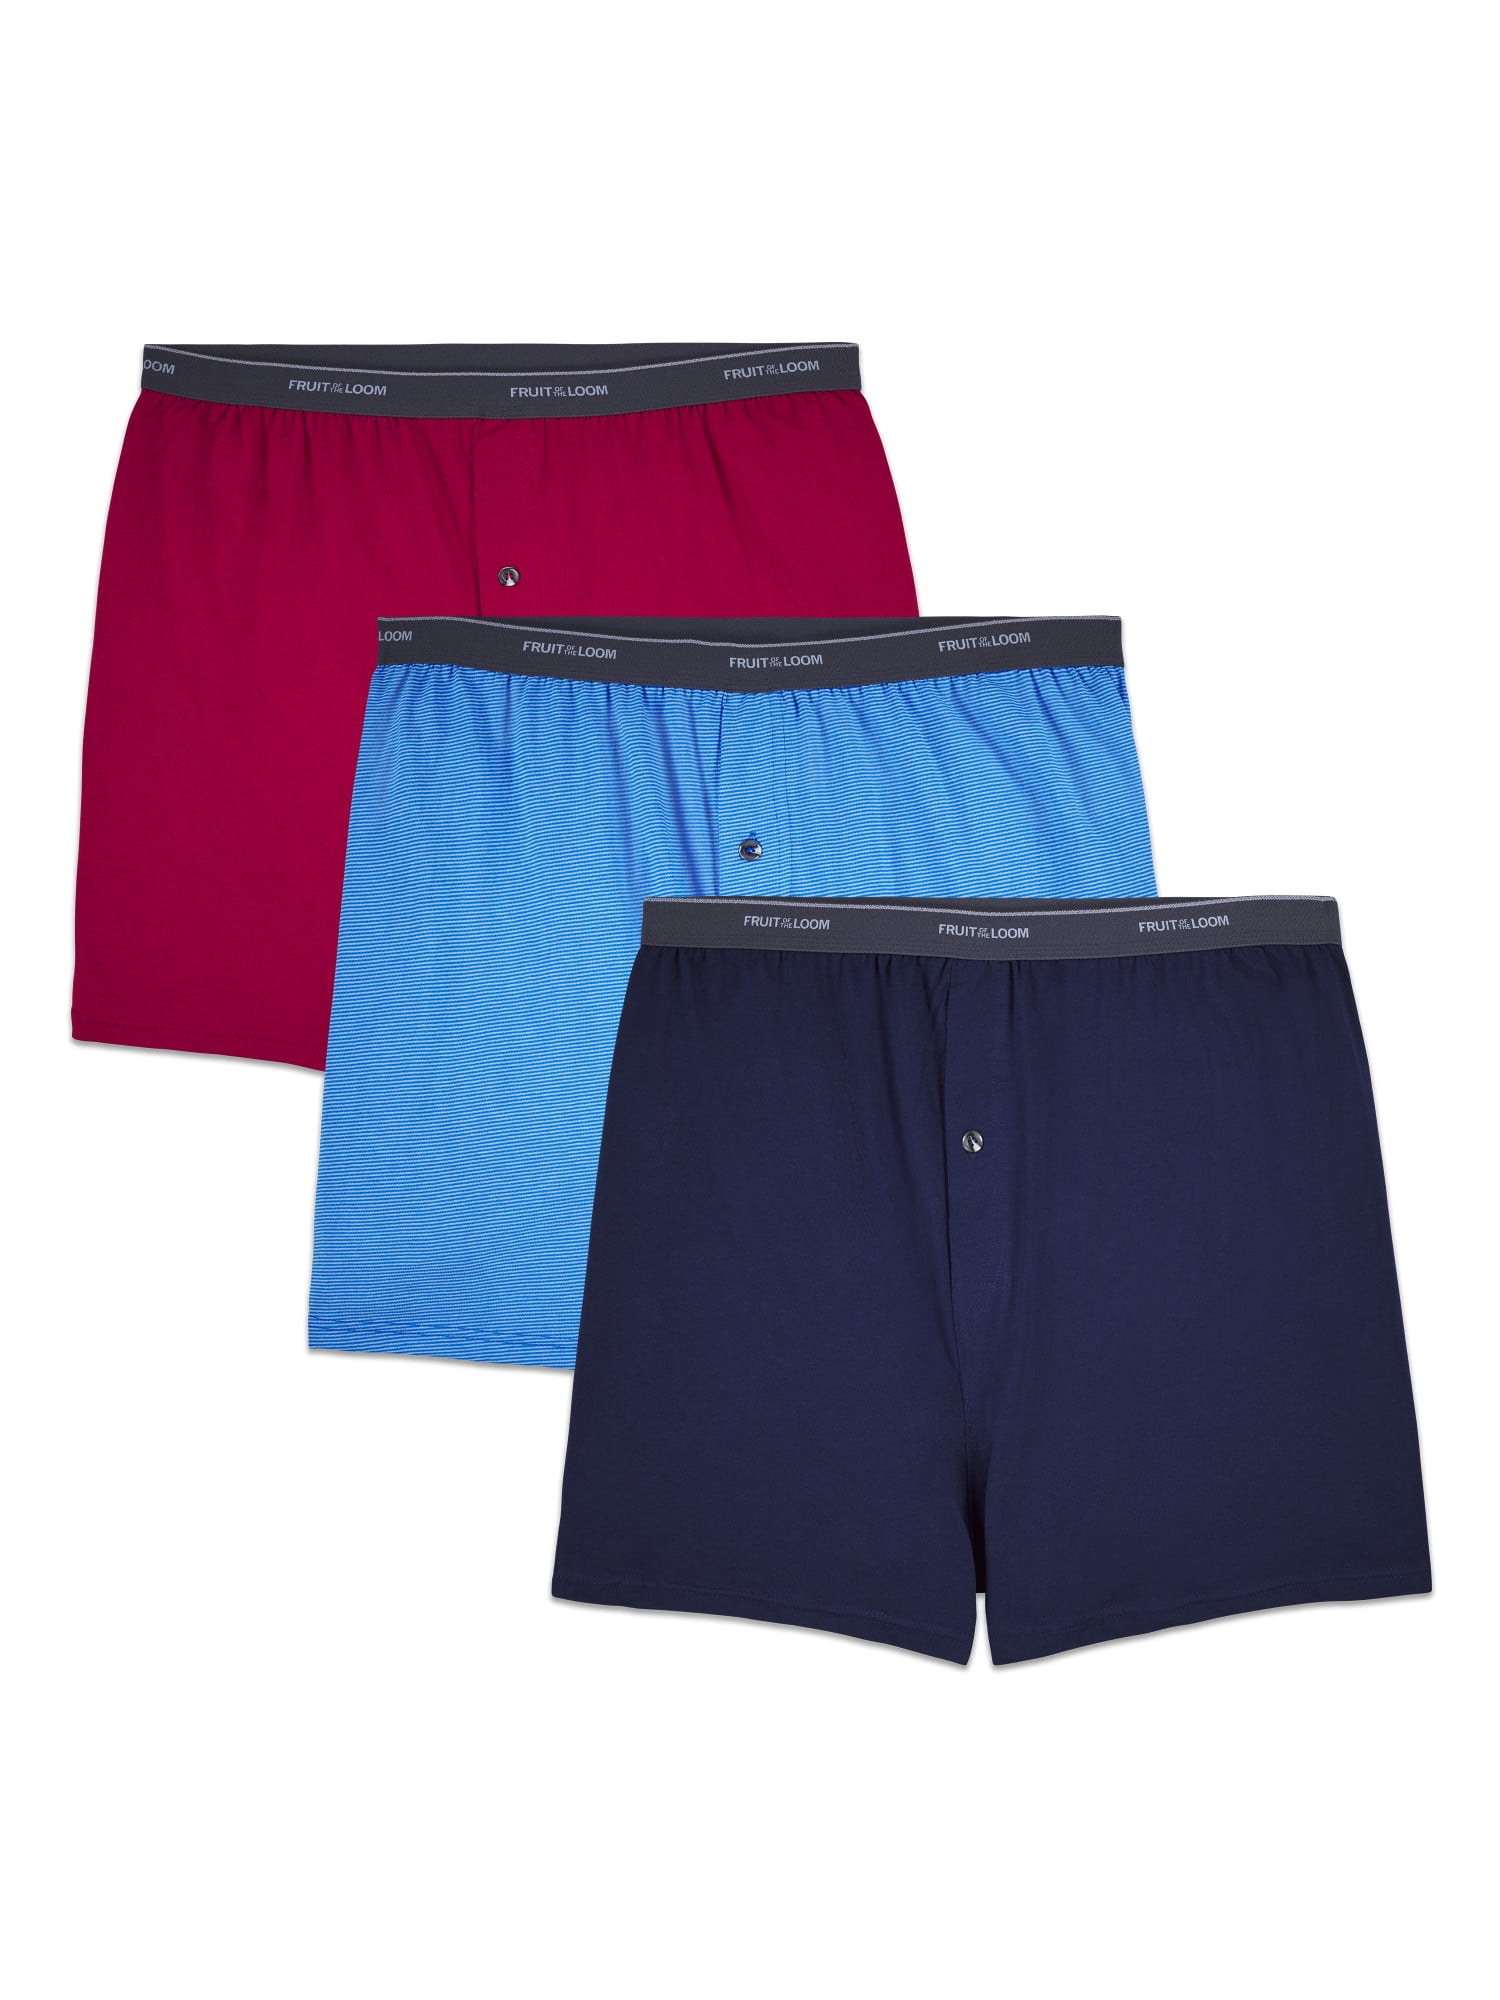 Fruit of the Loom Big Men's Knit Boxers, 3 Pack 